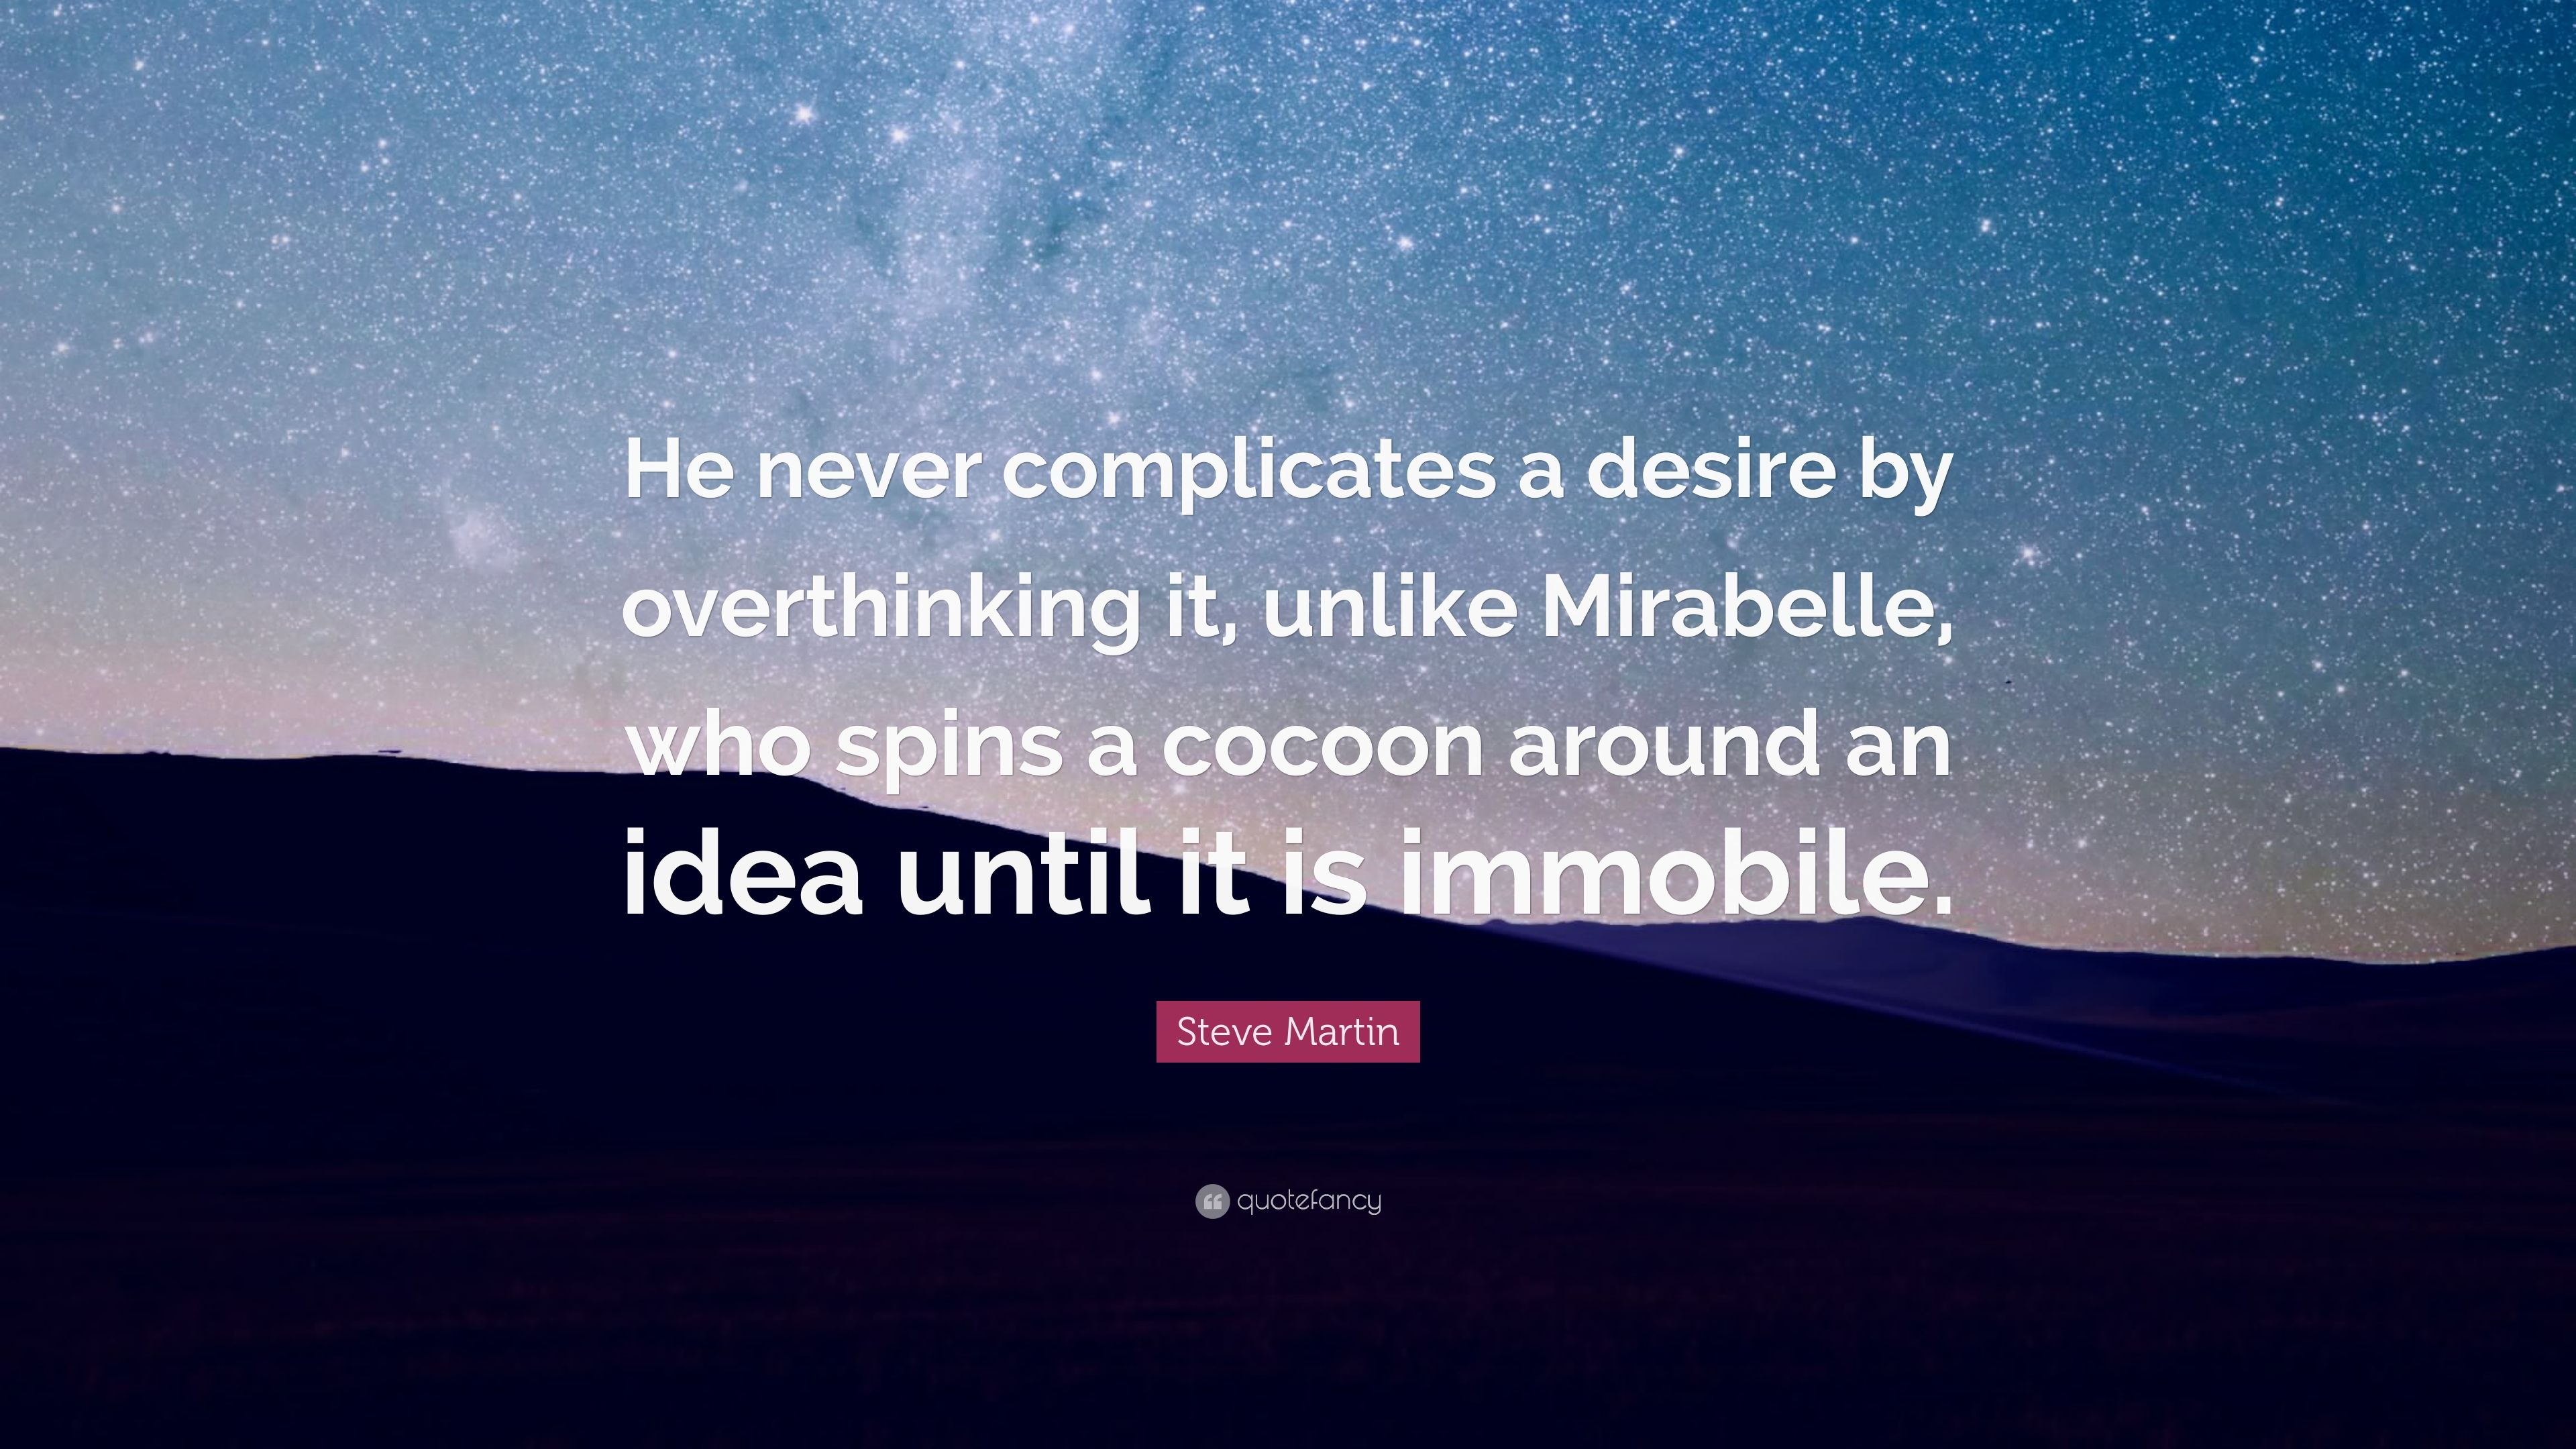 Steve Martin Quote: “He never complicates a desire by overthinking it, unlike Mirabelle, who spins a cocoon around an idea until it is immobi.” (7 wallpaper)